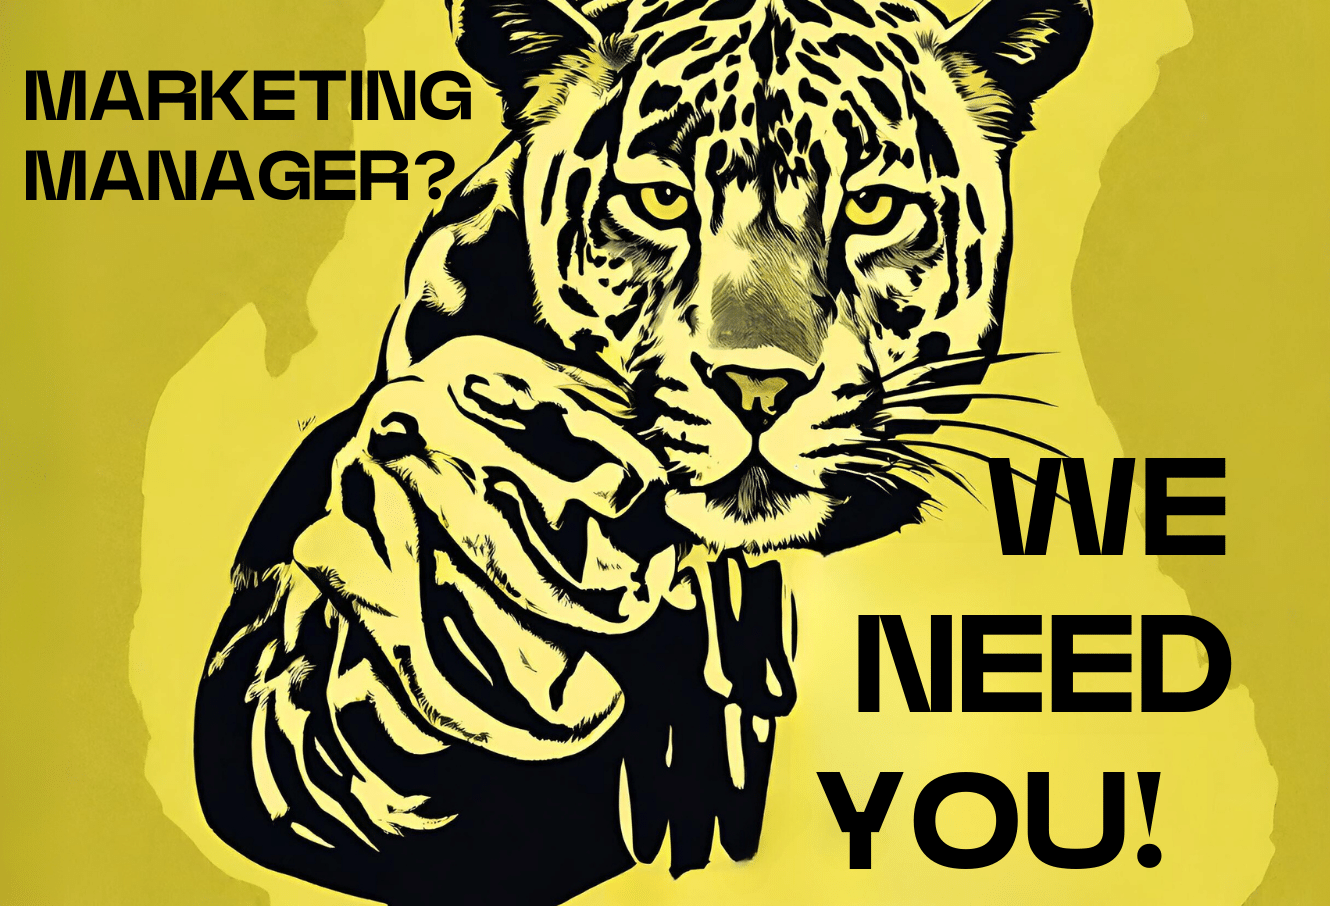 Join Our Team as Marketing Manager at Yellow Panther!